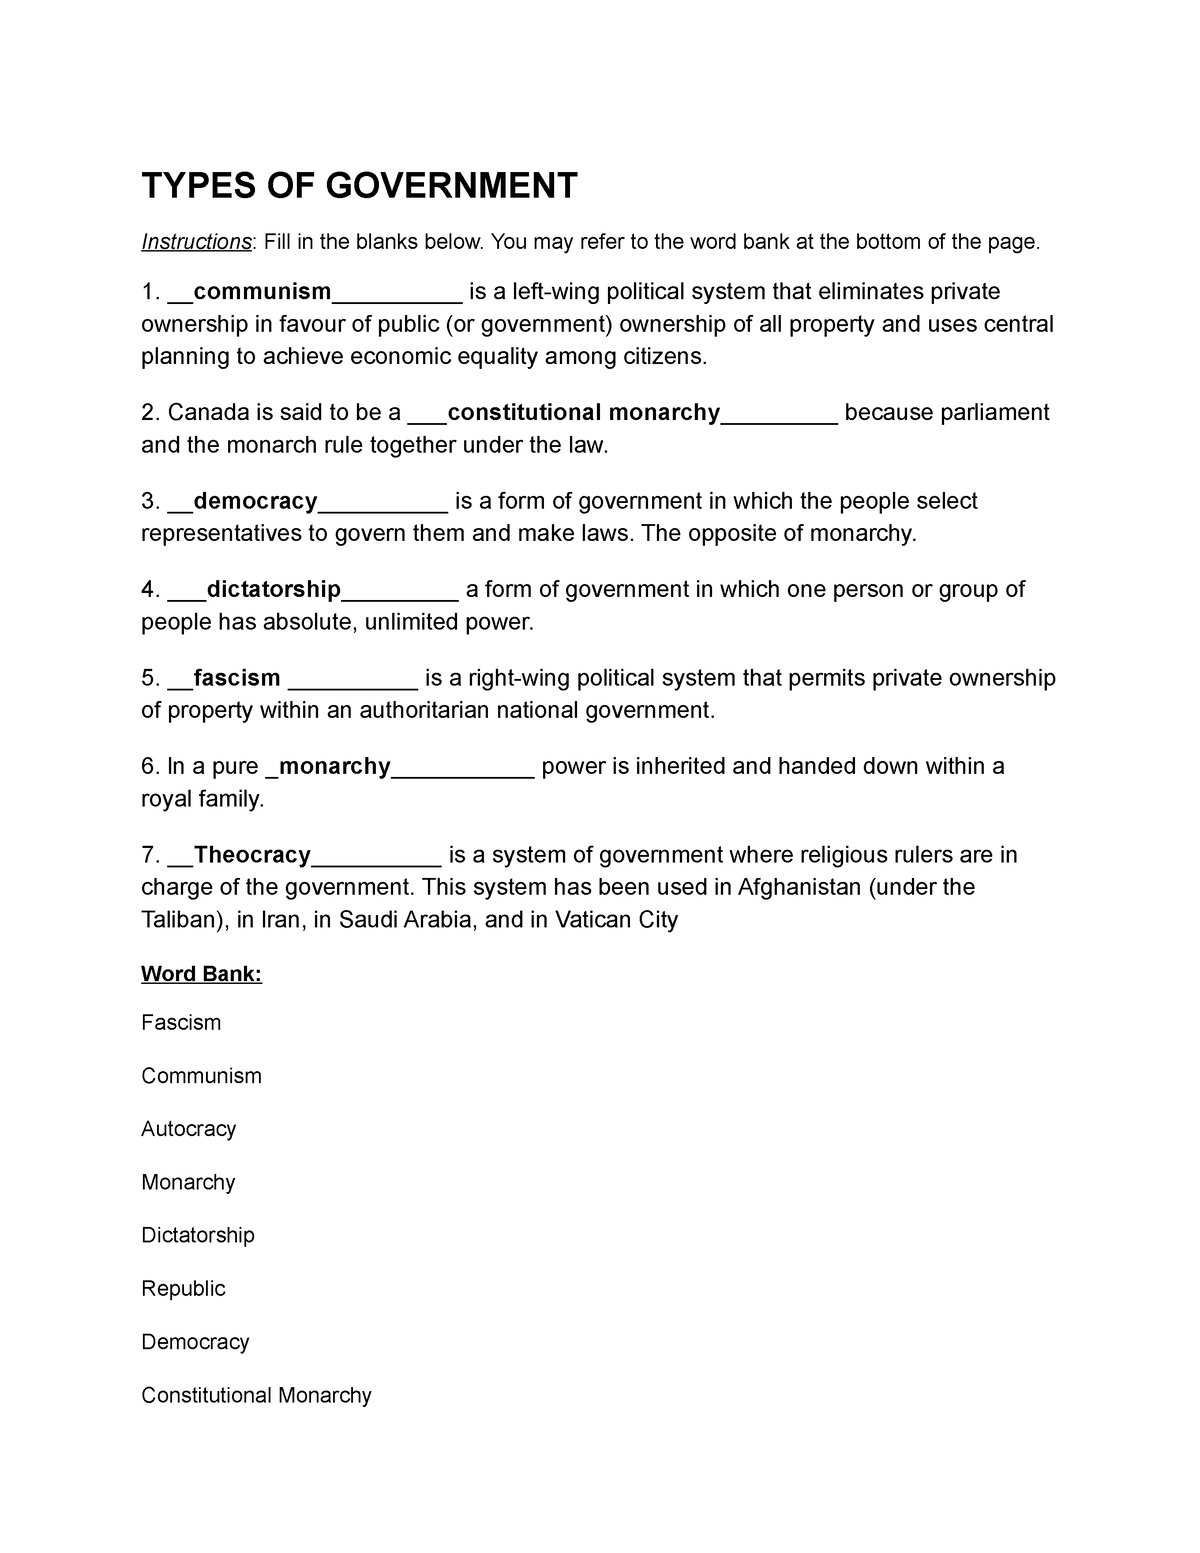 types-of-government-types-of-government-instructions-fill-in-the